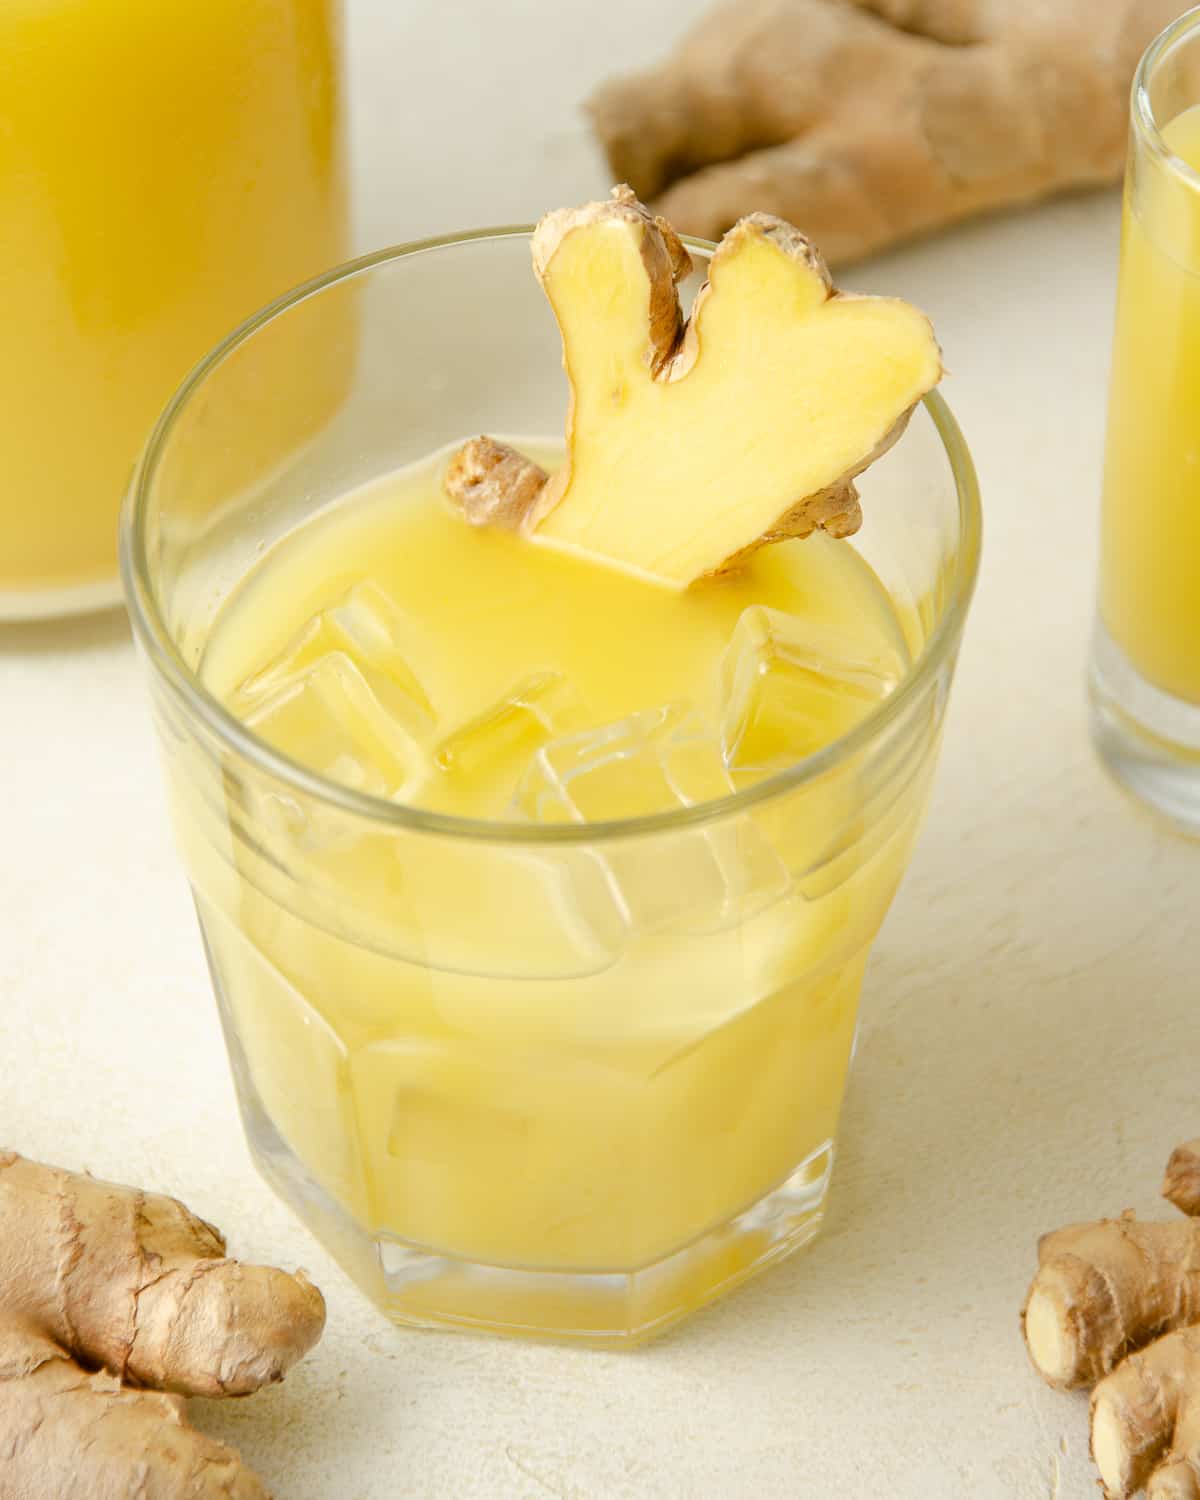 A glass of ginger juice with ice and sliced fresh ginger. More ginger juice and fresh ginger in the background.